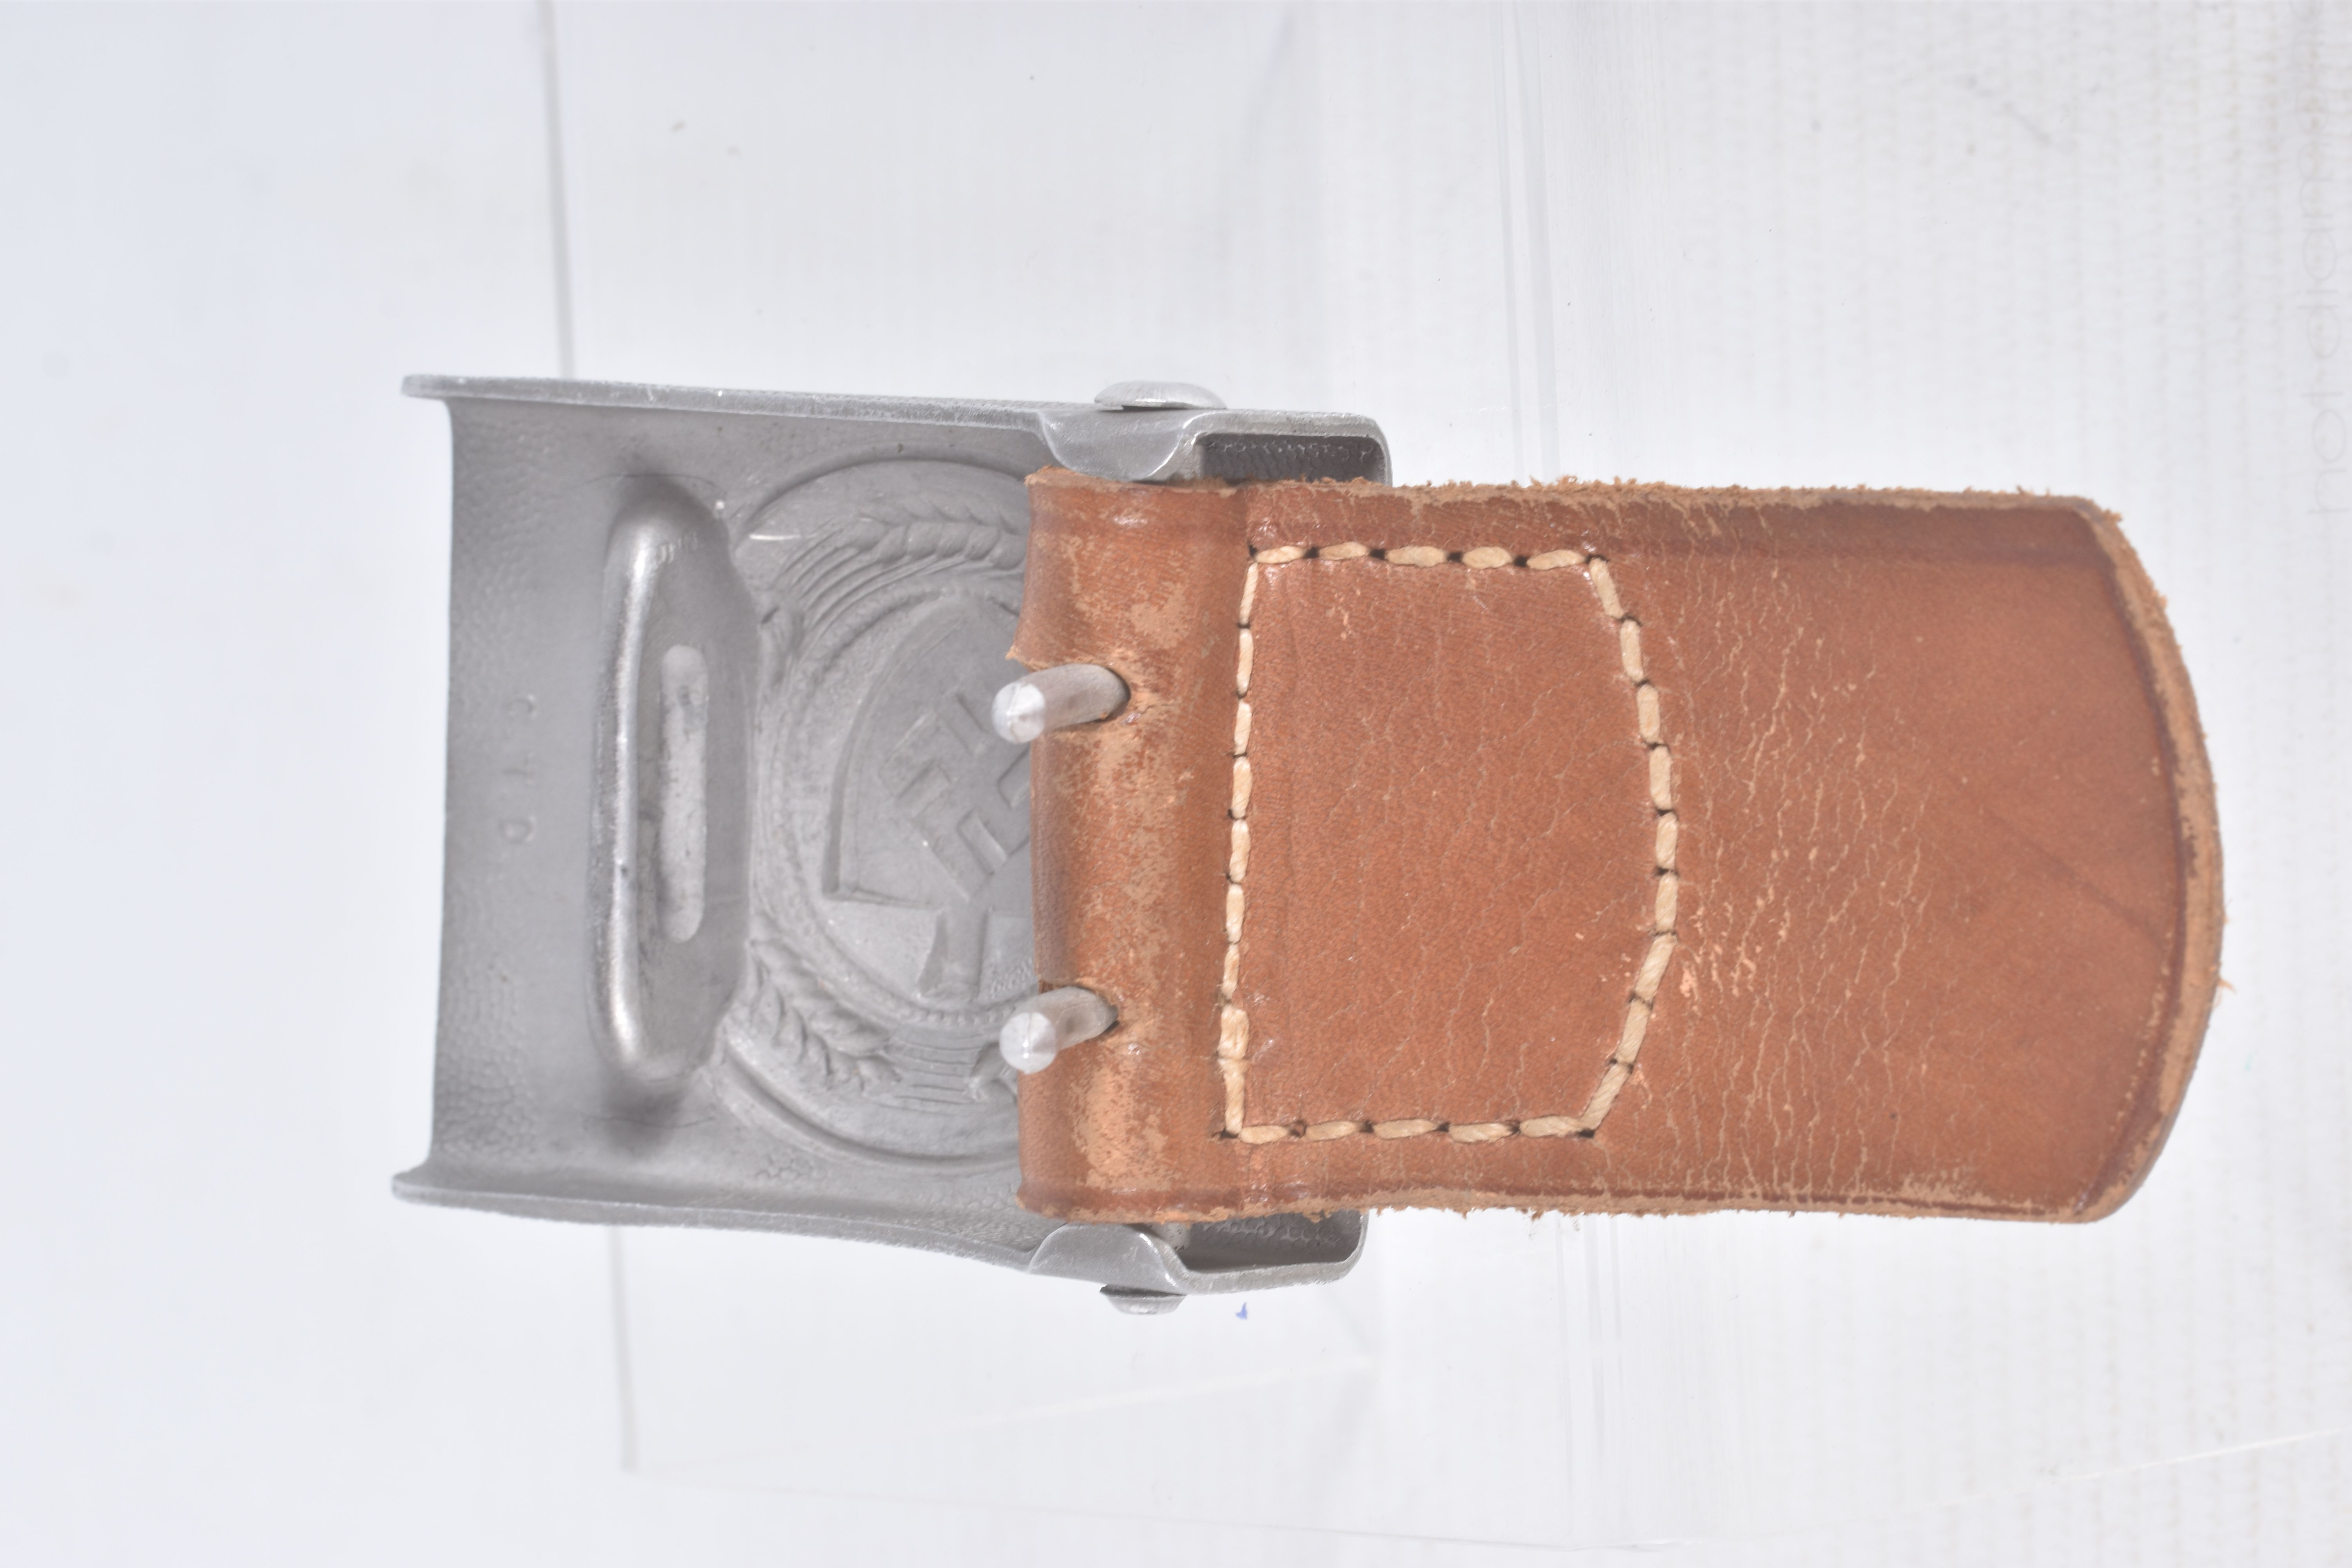 A WWII ERA GERMAN R.A.D BELT BUCKLE, this buckle is aluminium and features the RAD (Reich - Image 11 of 11